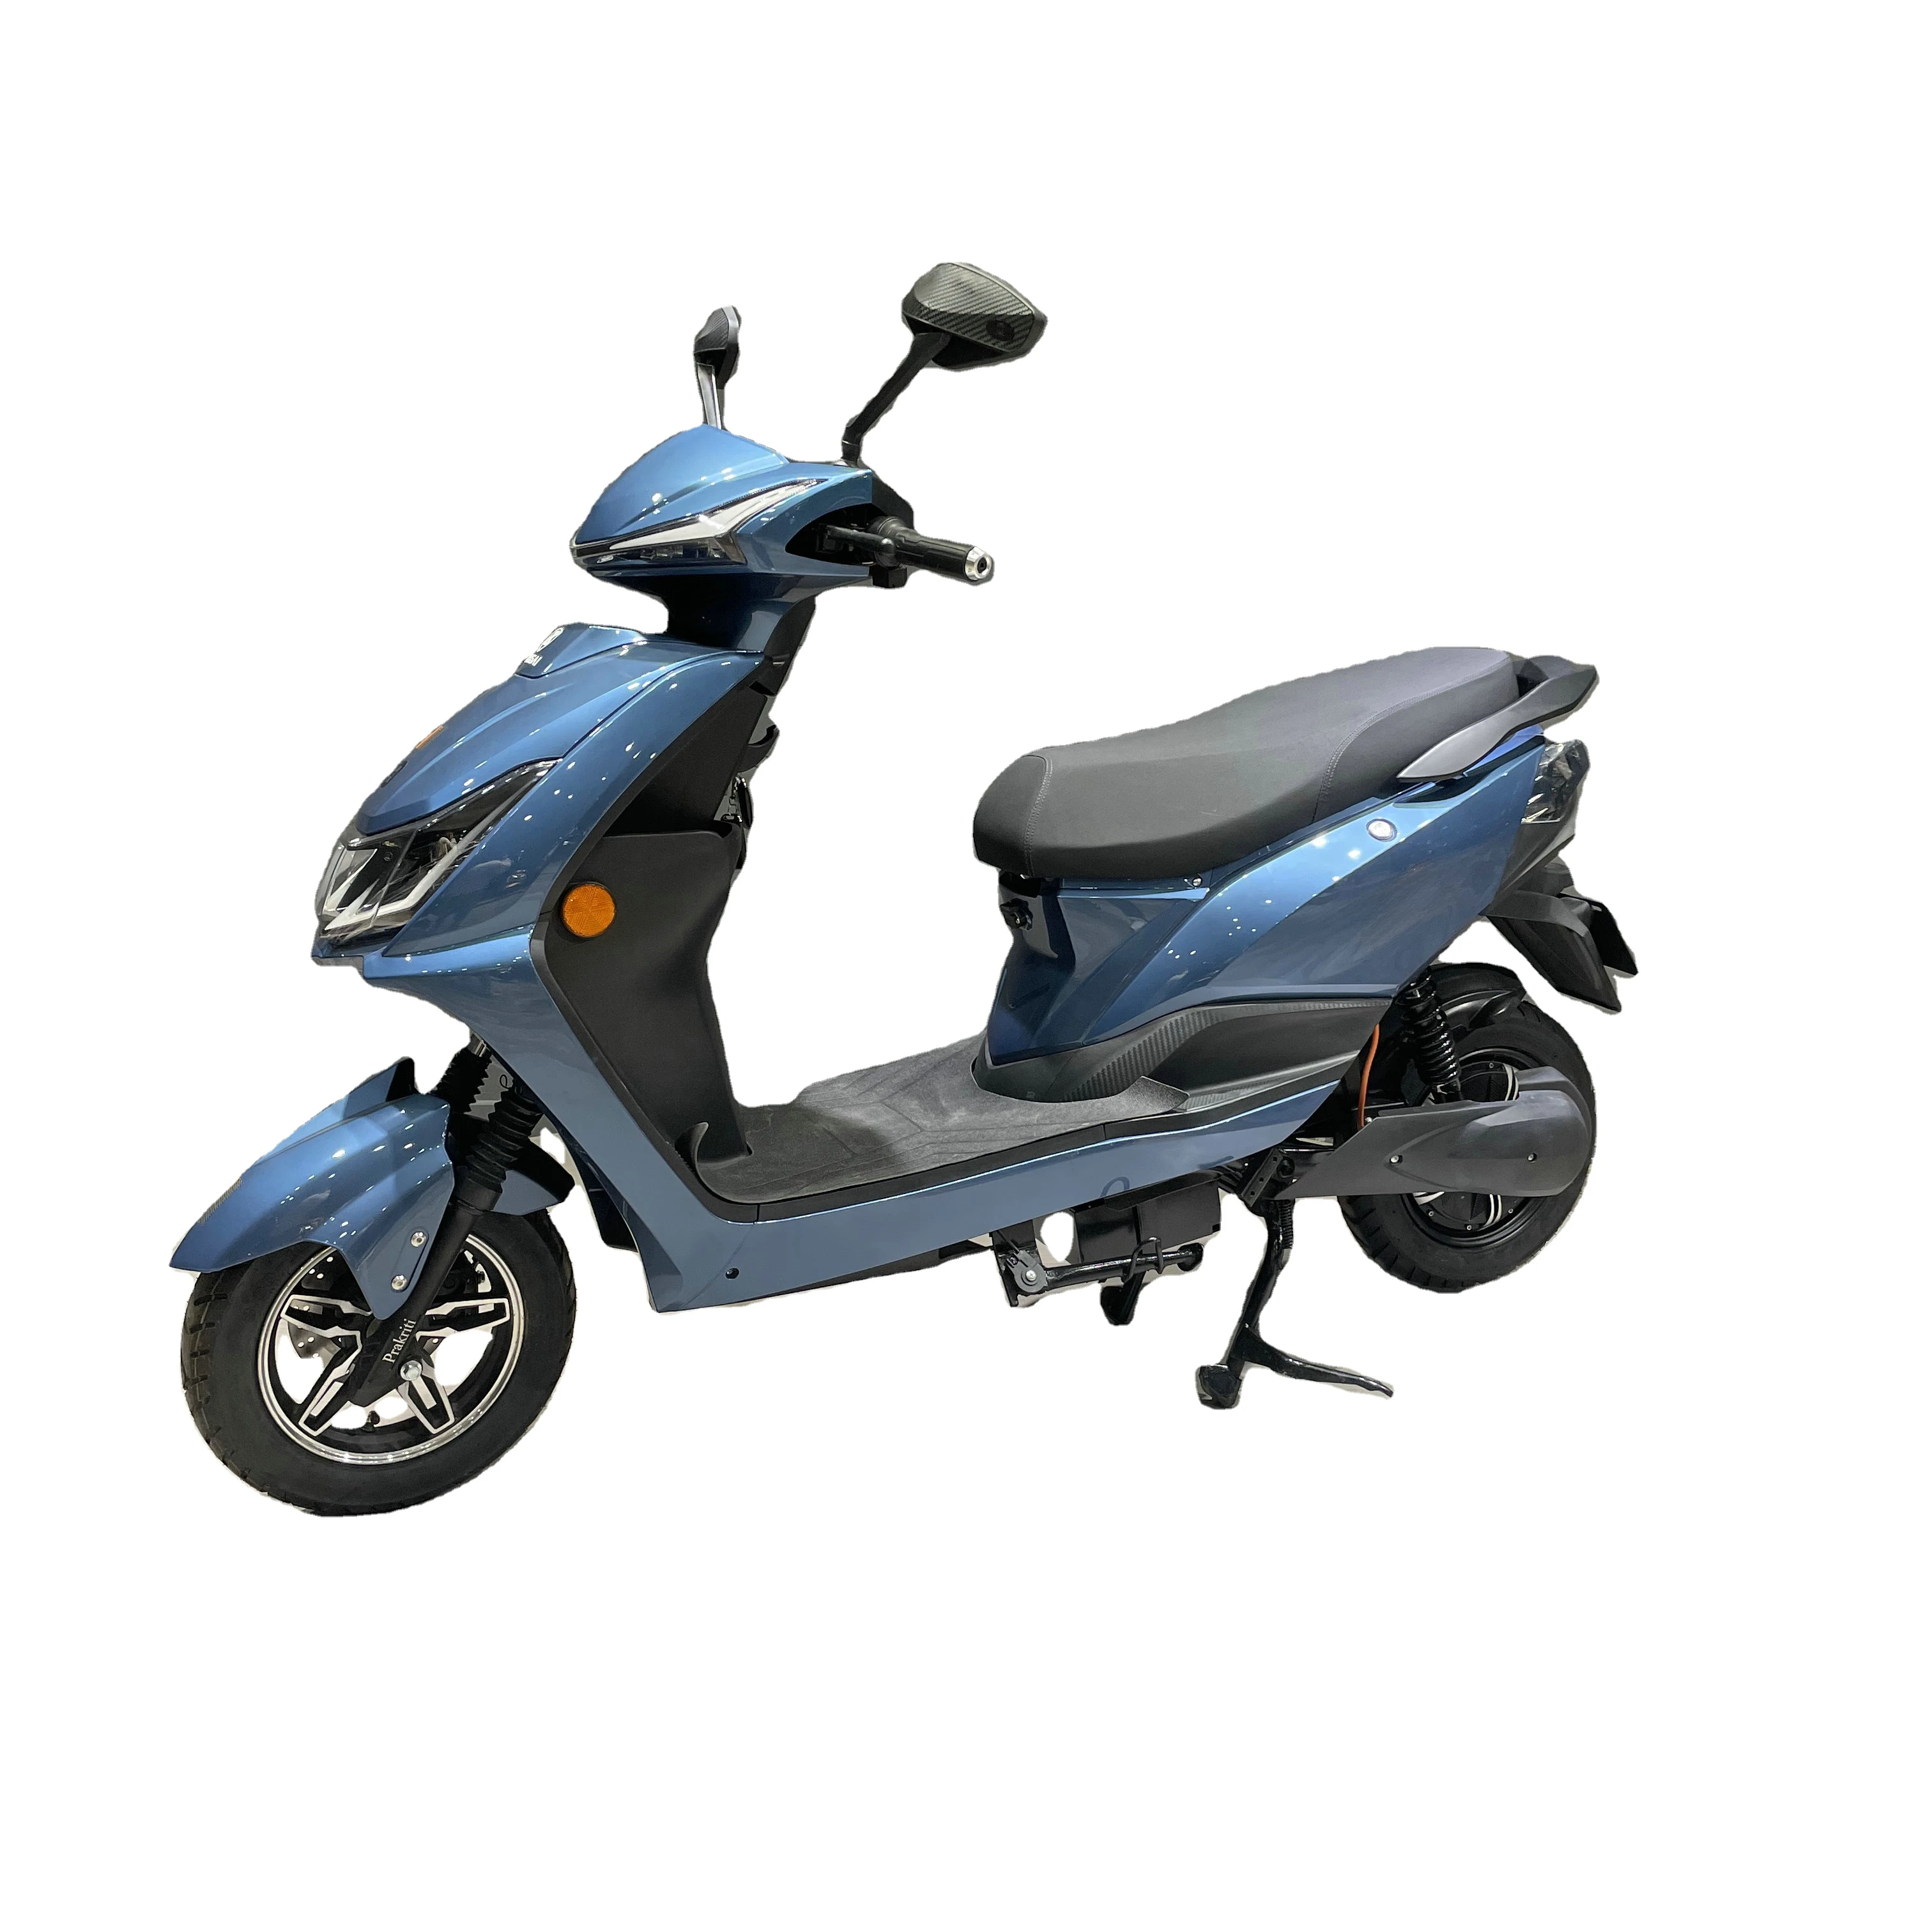 High Performance Moped 60km/h 2 Wheel Electric Bike Motorcycle Adult With Pedals Disc Brake Long Range Electric Citycoco Scooter